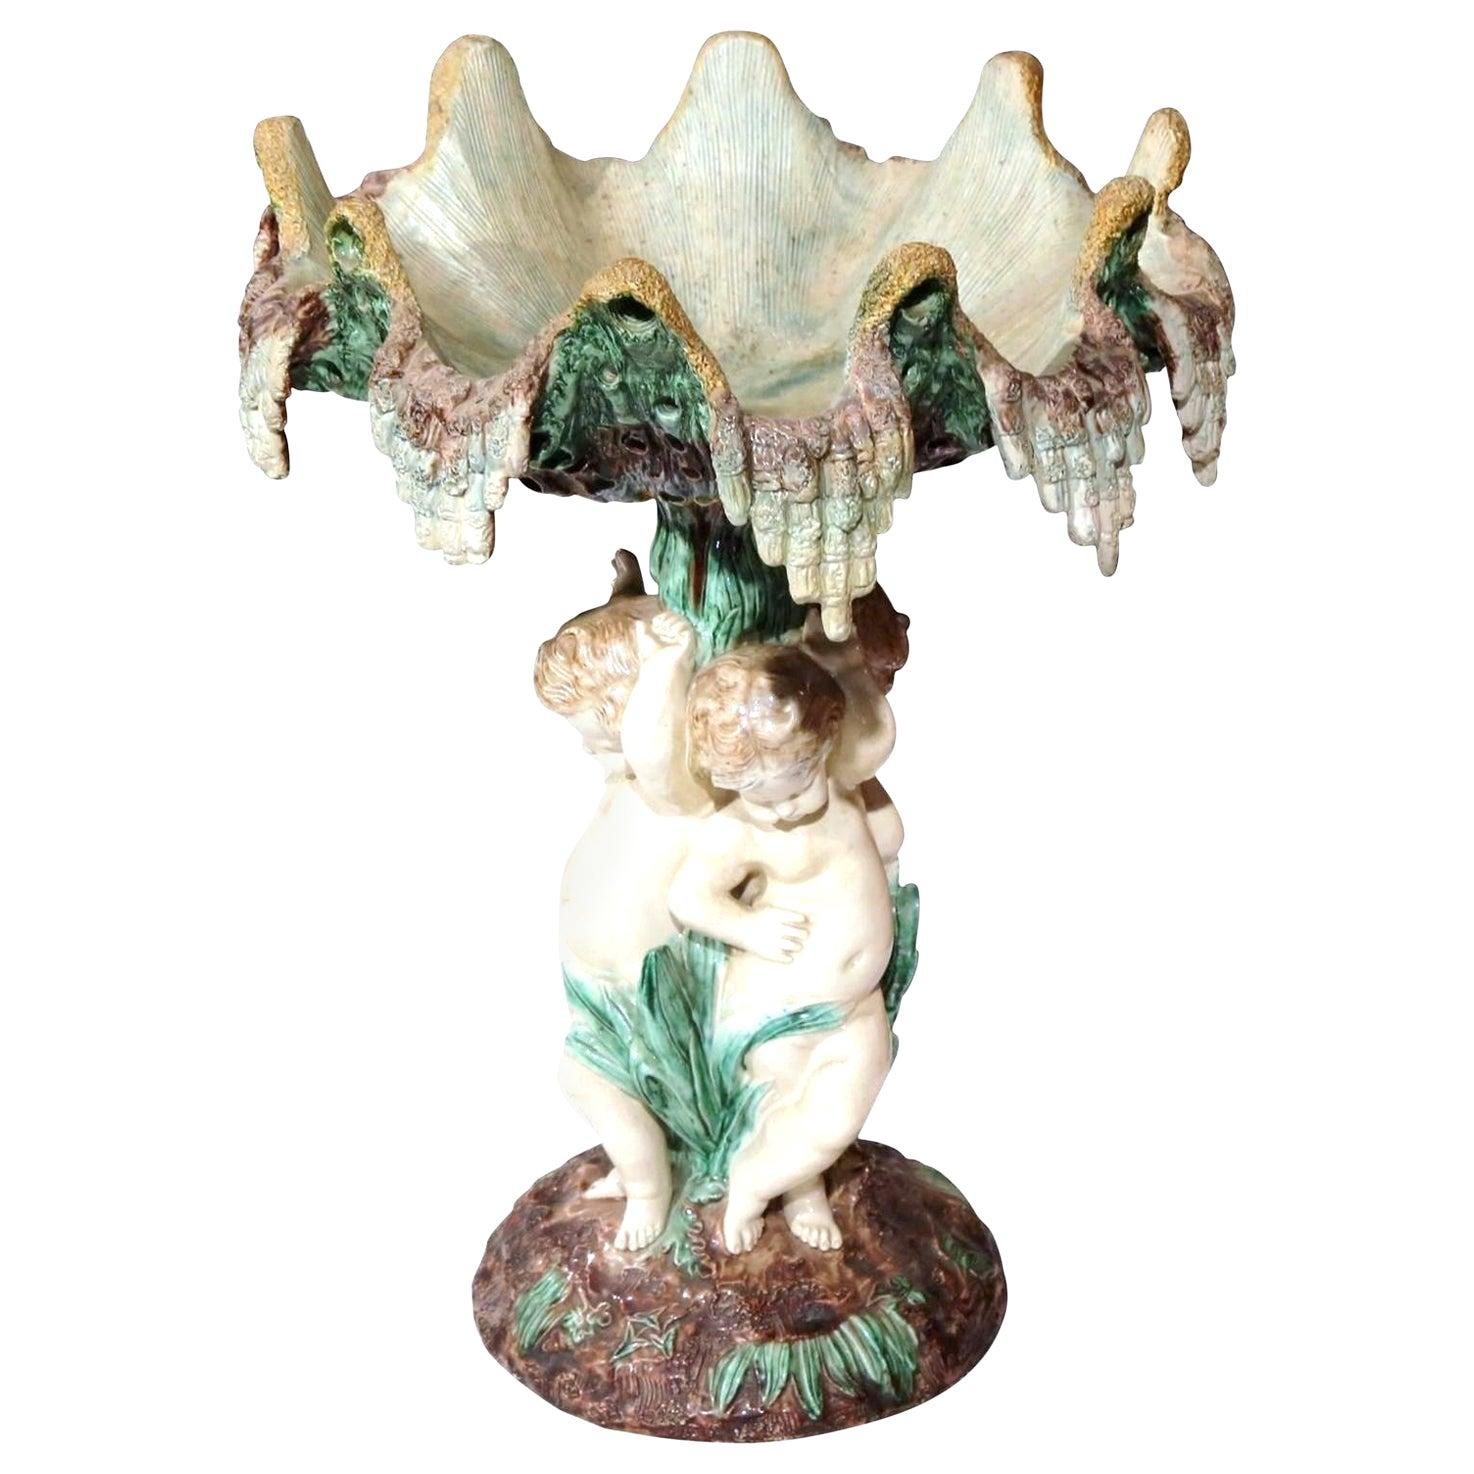 Decorate a table or counter top with this colorful antique Majolica centerpiece. Crafted in France, circa 1890 and attributed to Thomas Sergent, the elegant jardinière features a decorative bowl with dripping motif on the sides and three cherubs